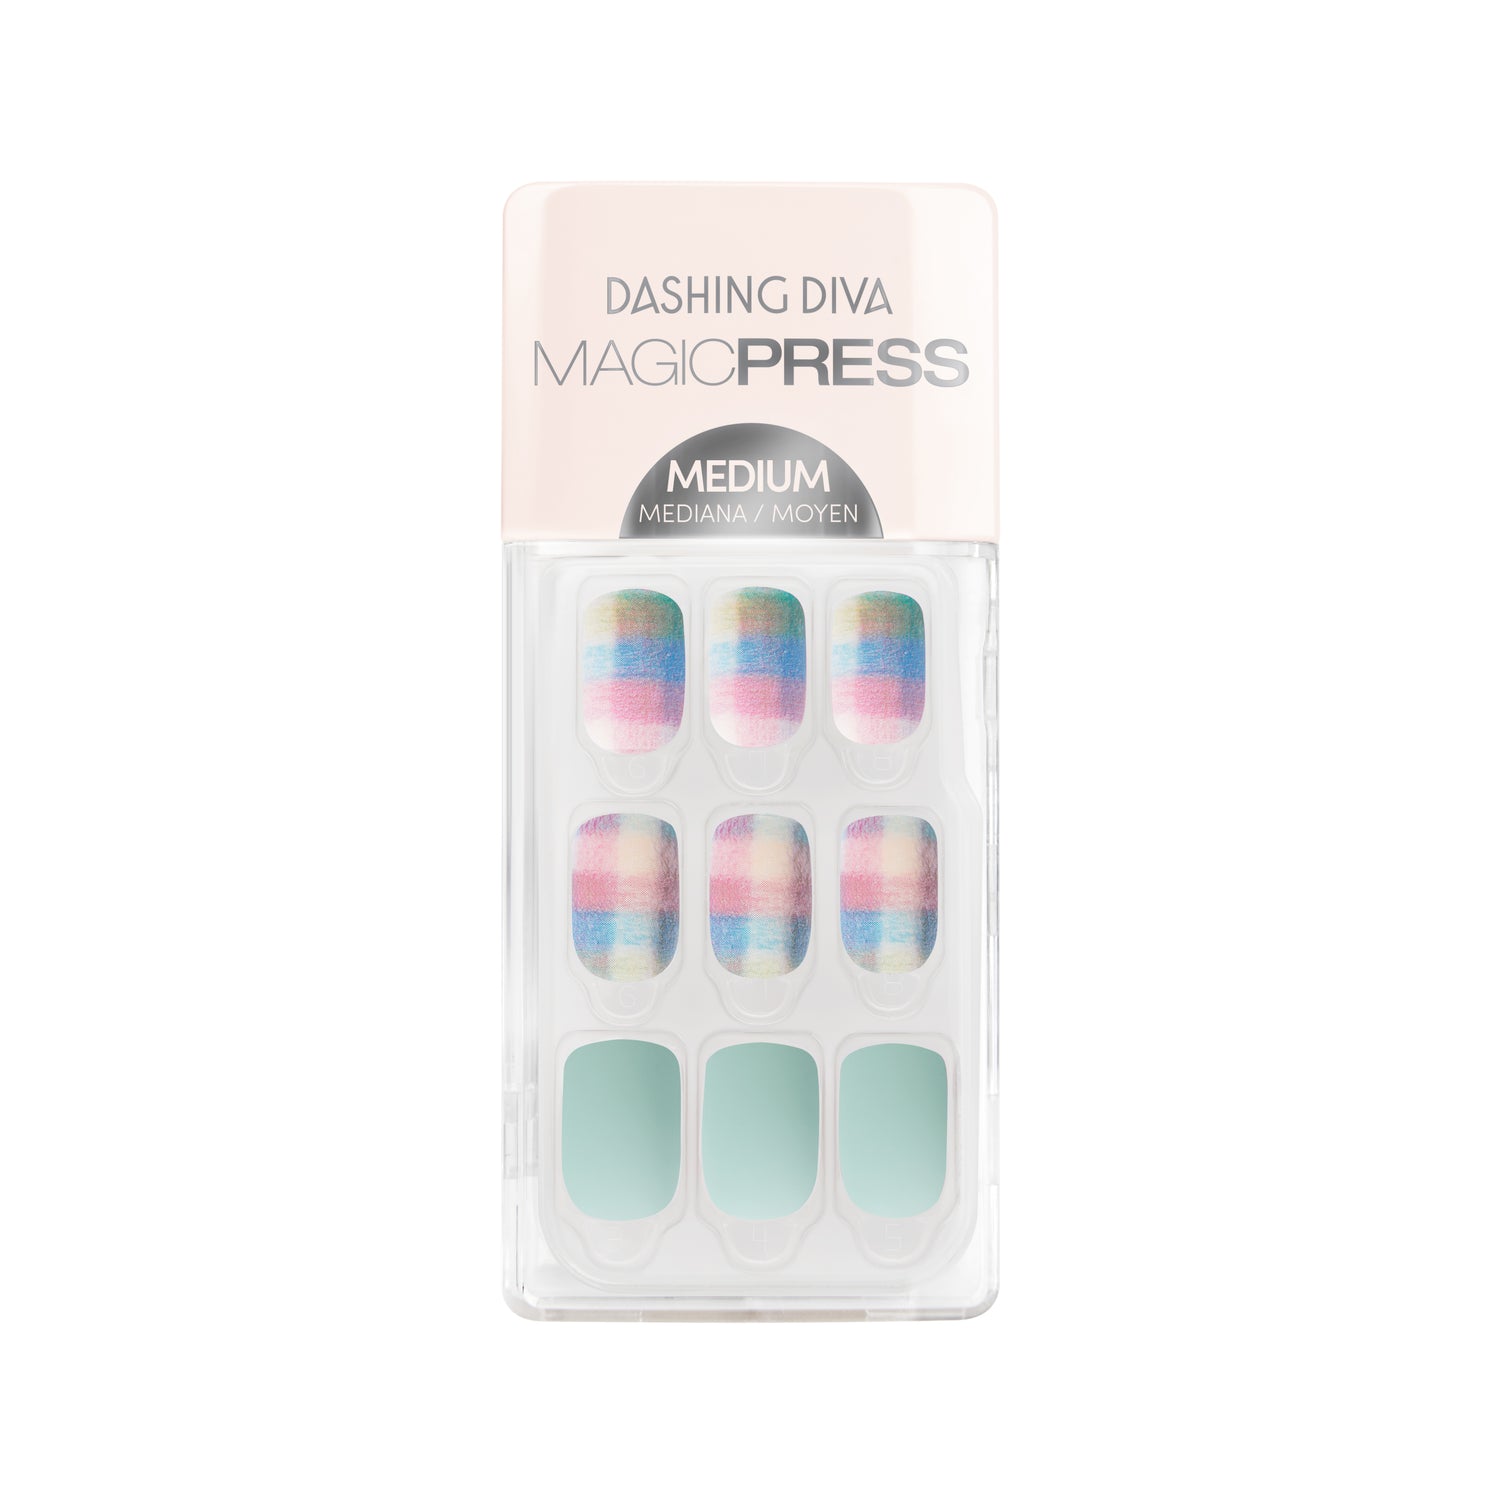 Dashing Diva MAGIC PRESS medium, square mint green press on gel nails with multi color plaid accents.